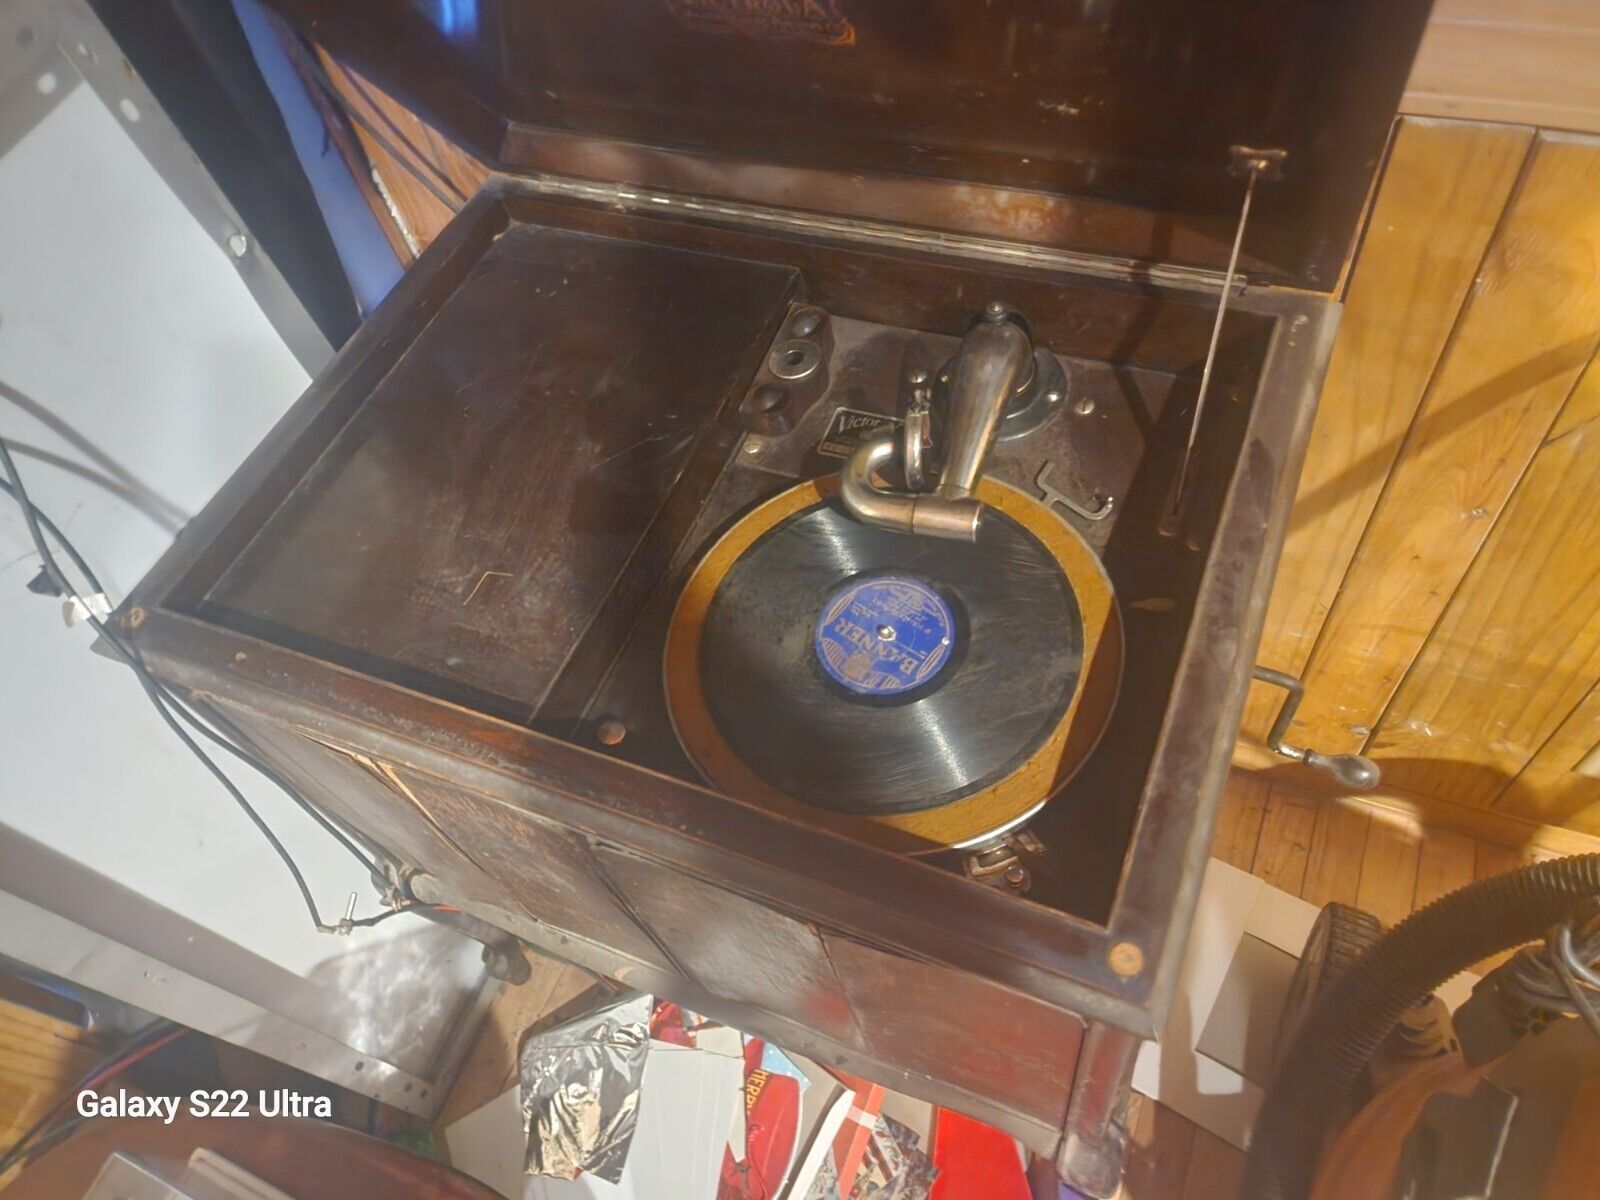 vintage record player